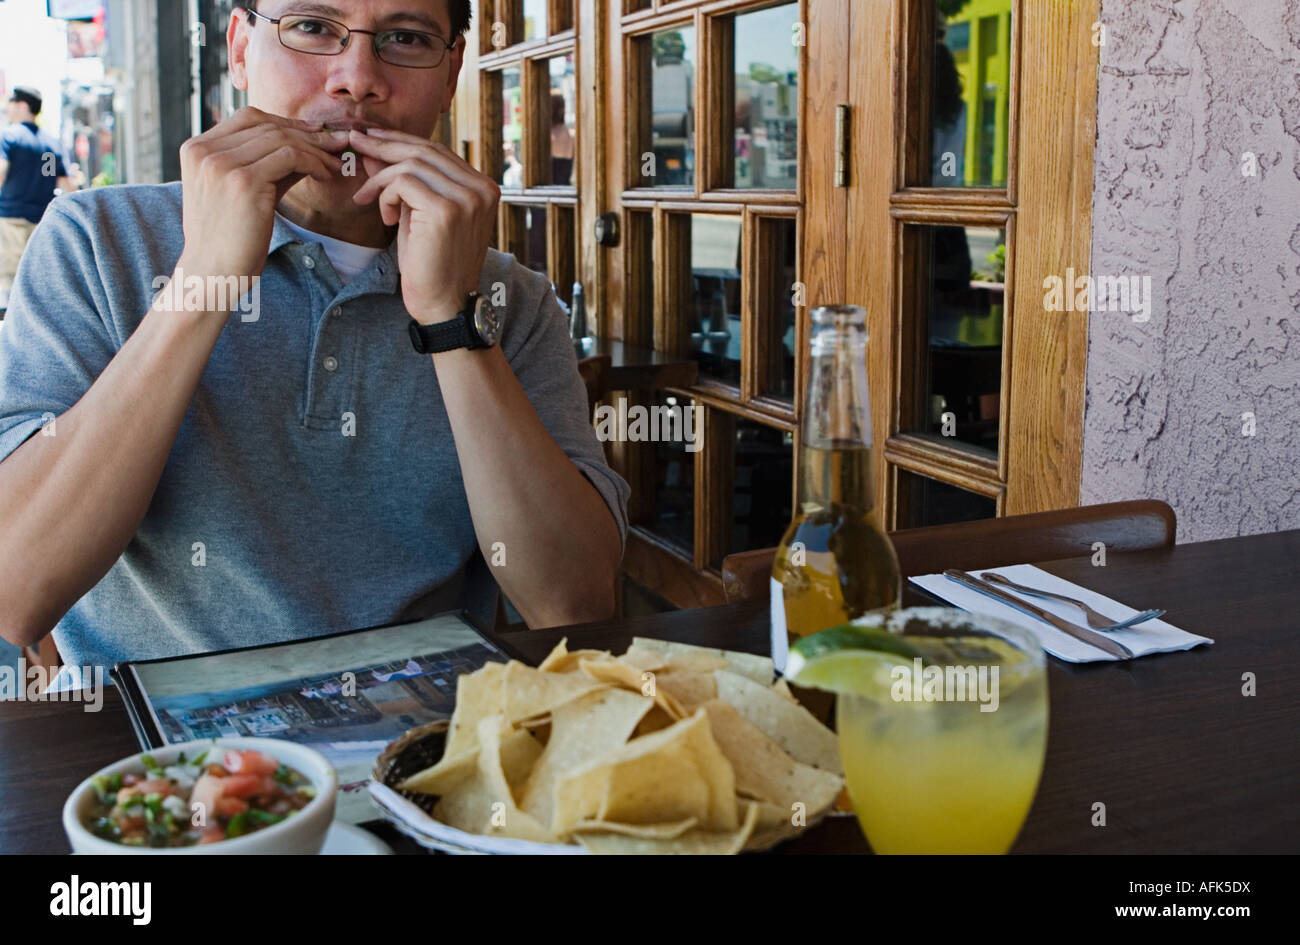 Man eating at outdoor restaurant. Stock Photo